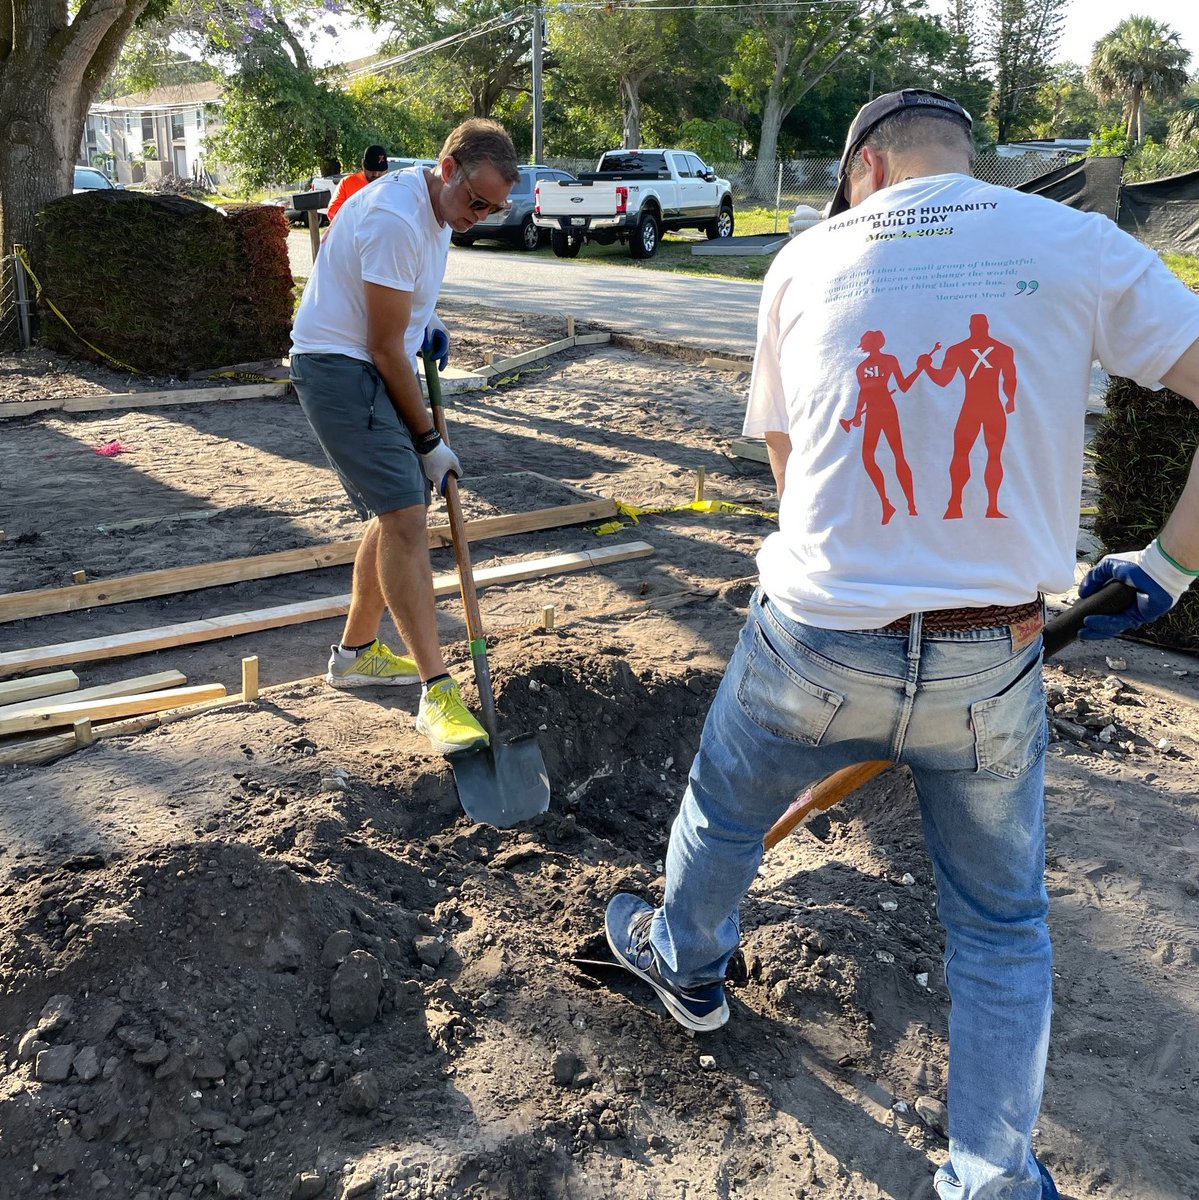 Go Team @MaintenXOnline and Schifino Lee! 🙌 Thanks goes to our client for having us over this week to lend a hand at their build for @HabitatPWP to help finish a new home for the Hovey family. Hope we can do this again soon! #HabitatForHumanity #MaintenX #SchifinoLee #GivingBack